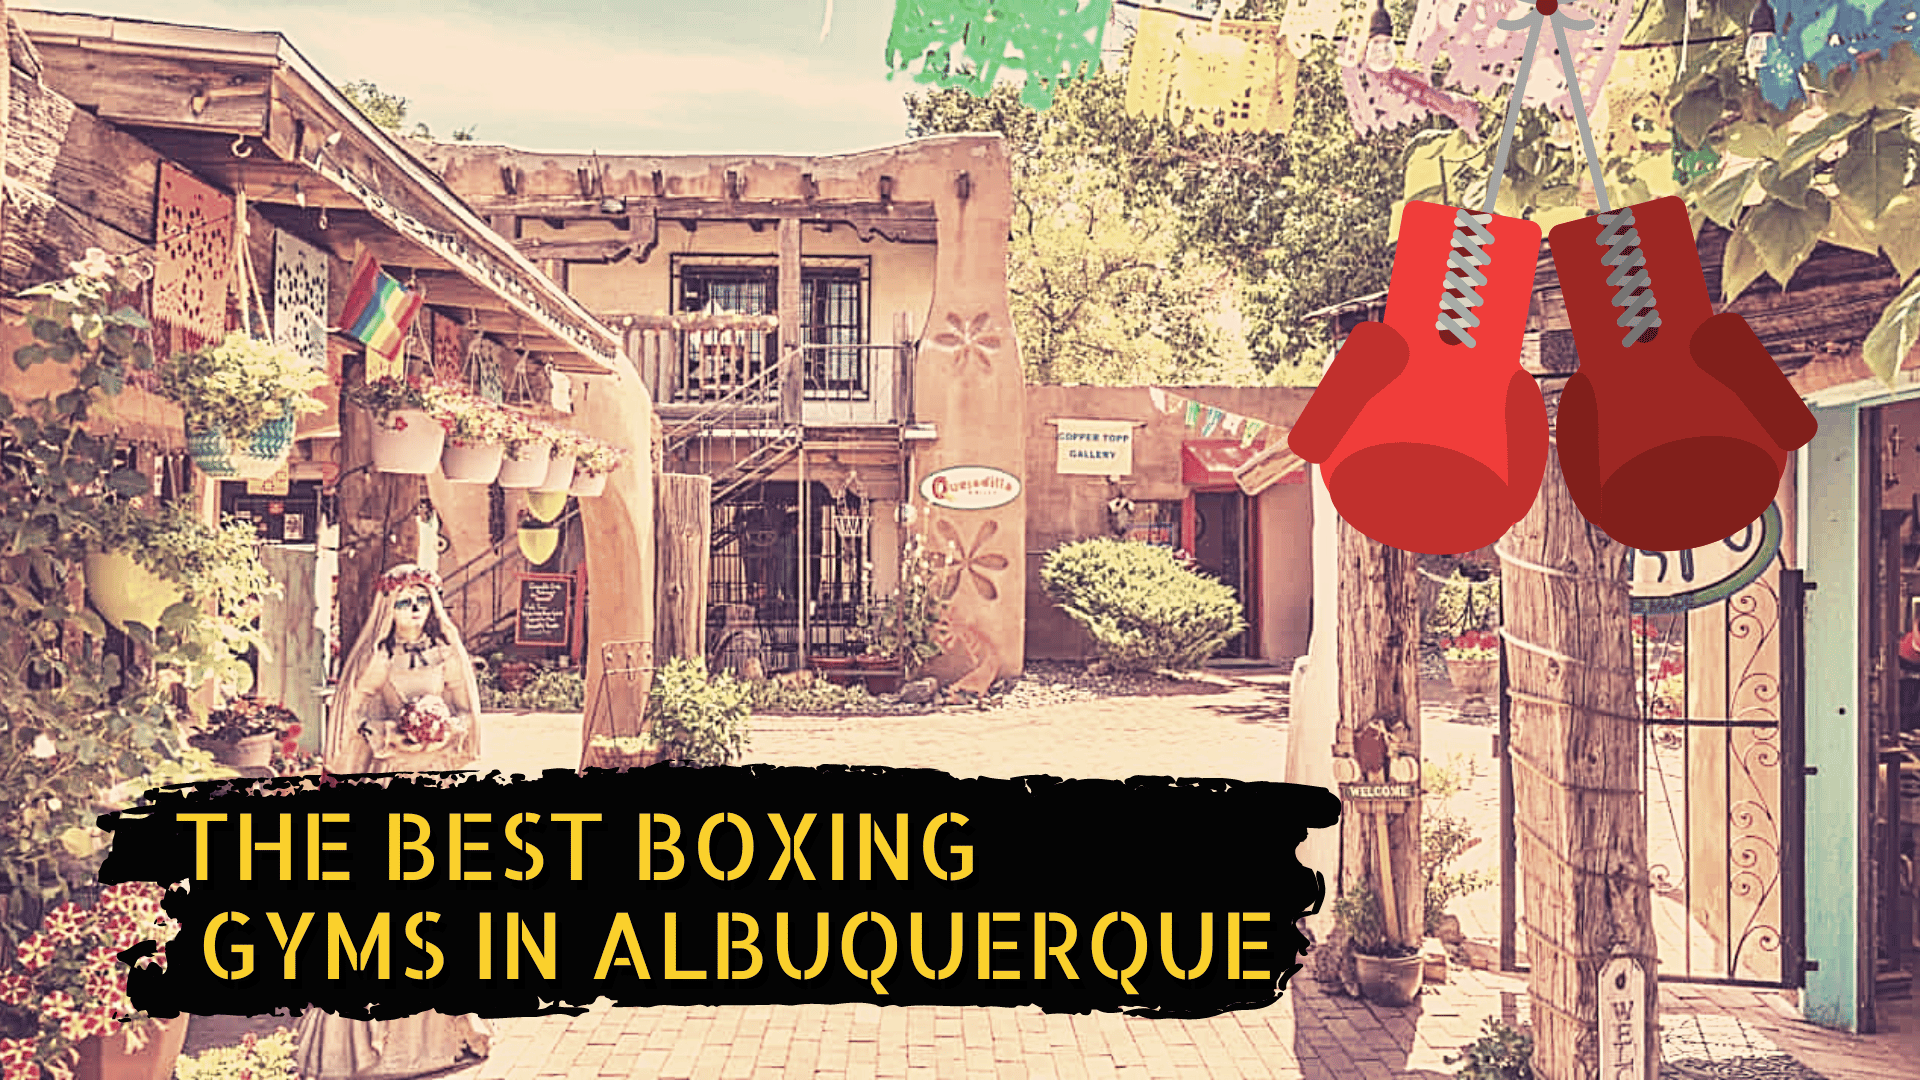 An image of albuquerque with the title "Best boxing gyms in albuquerque"